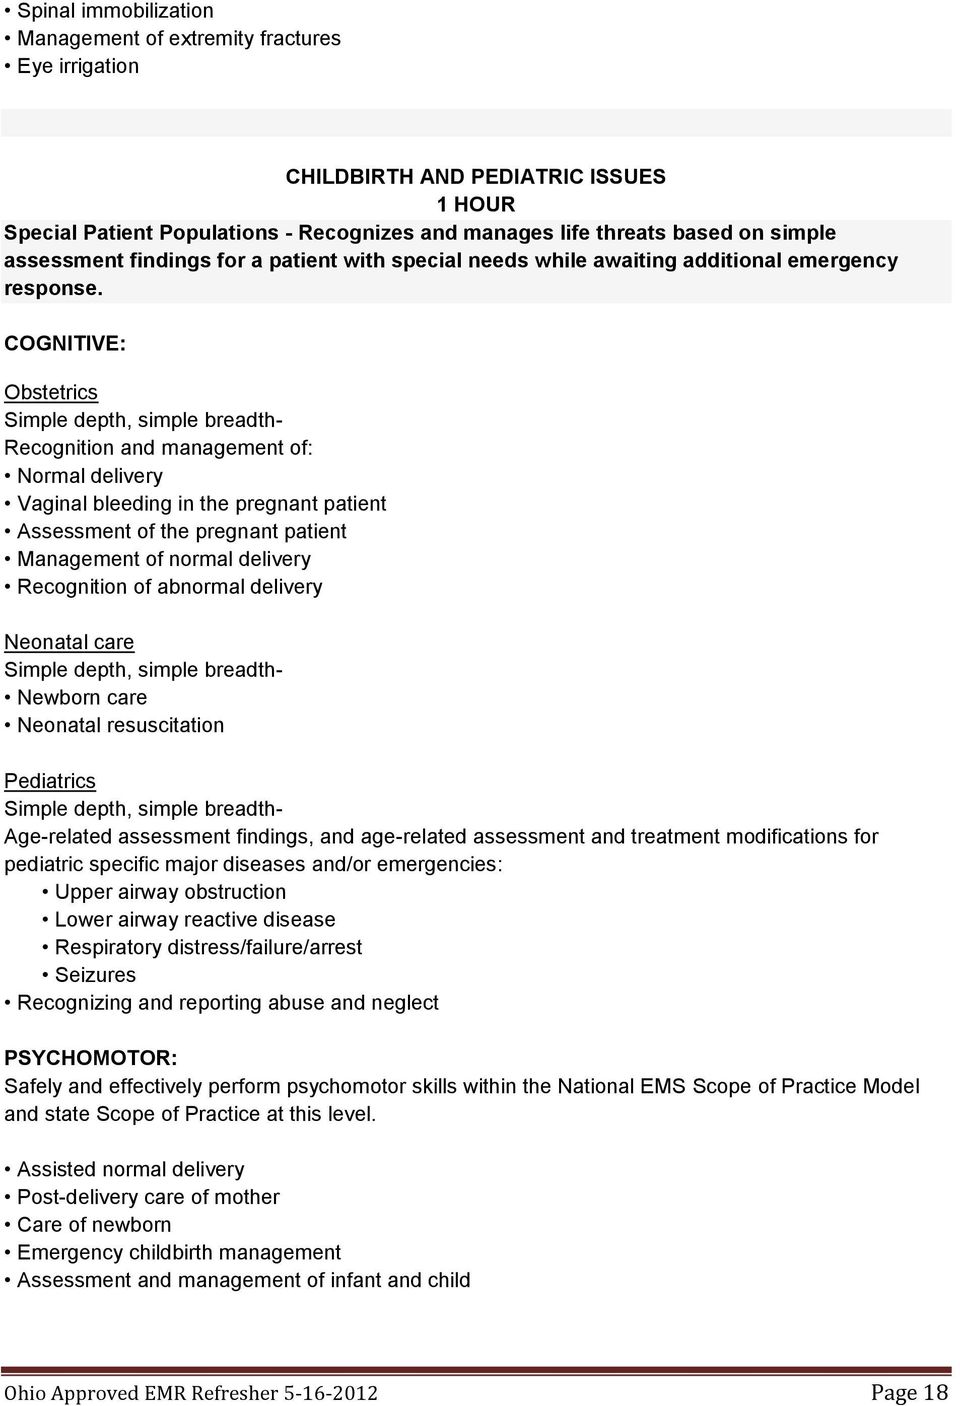 COGNITIVE: Obstetrics Recognition and management of: Normal delivery Vaginal bleeding in the pregnant patient Assessment of the pregnant patient Management of normal delivery Recognition of abnormal